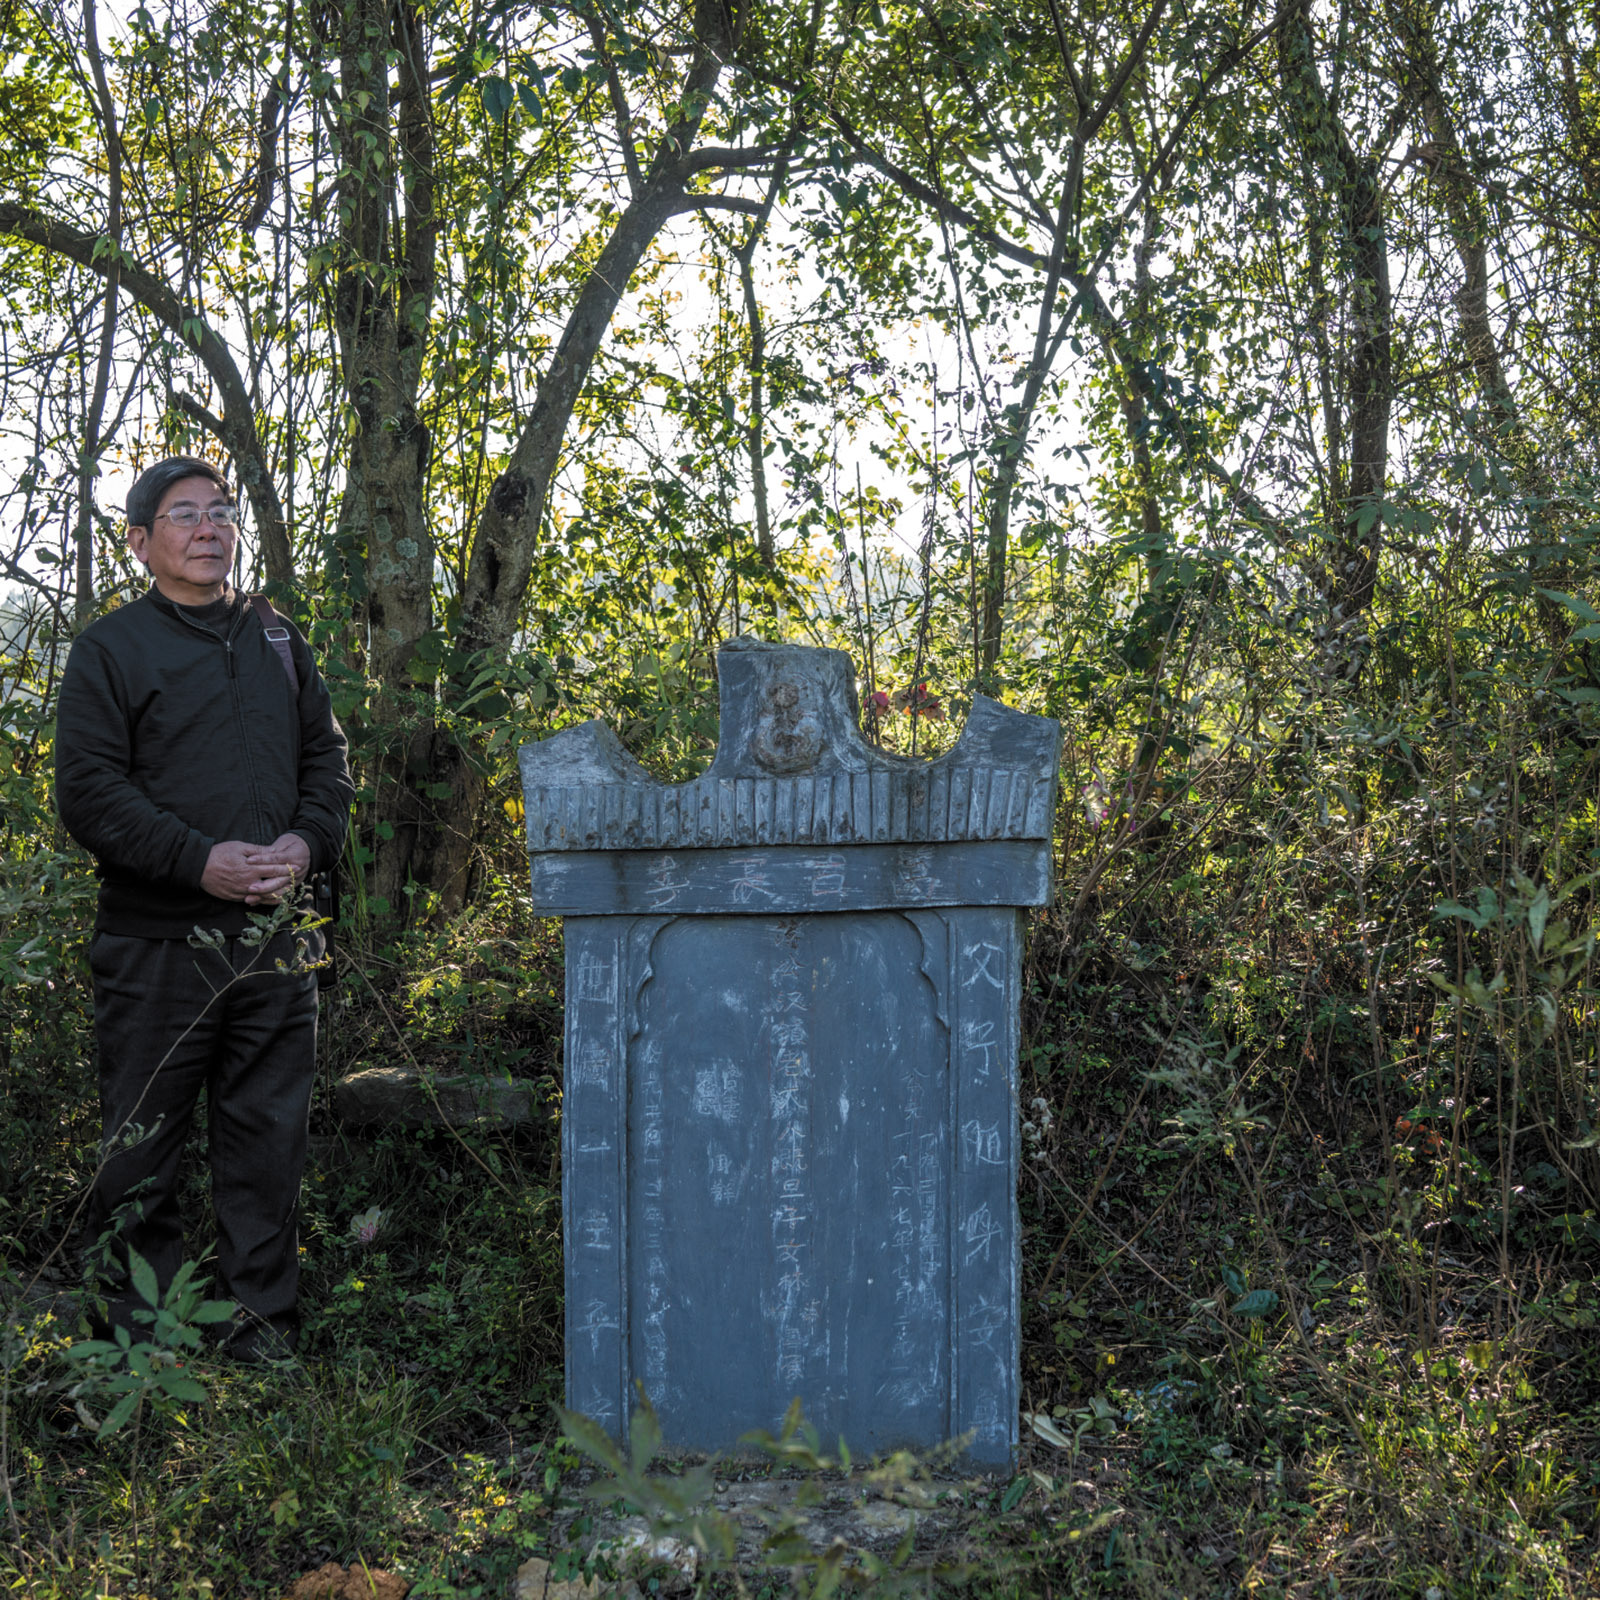 Tan Hecheng at a tombstone put up by Zhou Qun for her husband and three children, who were among the thousands of people killed during the Cultural Revolution in Dao County, southern China, November 2016; photograph by Sim Chi Yin